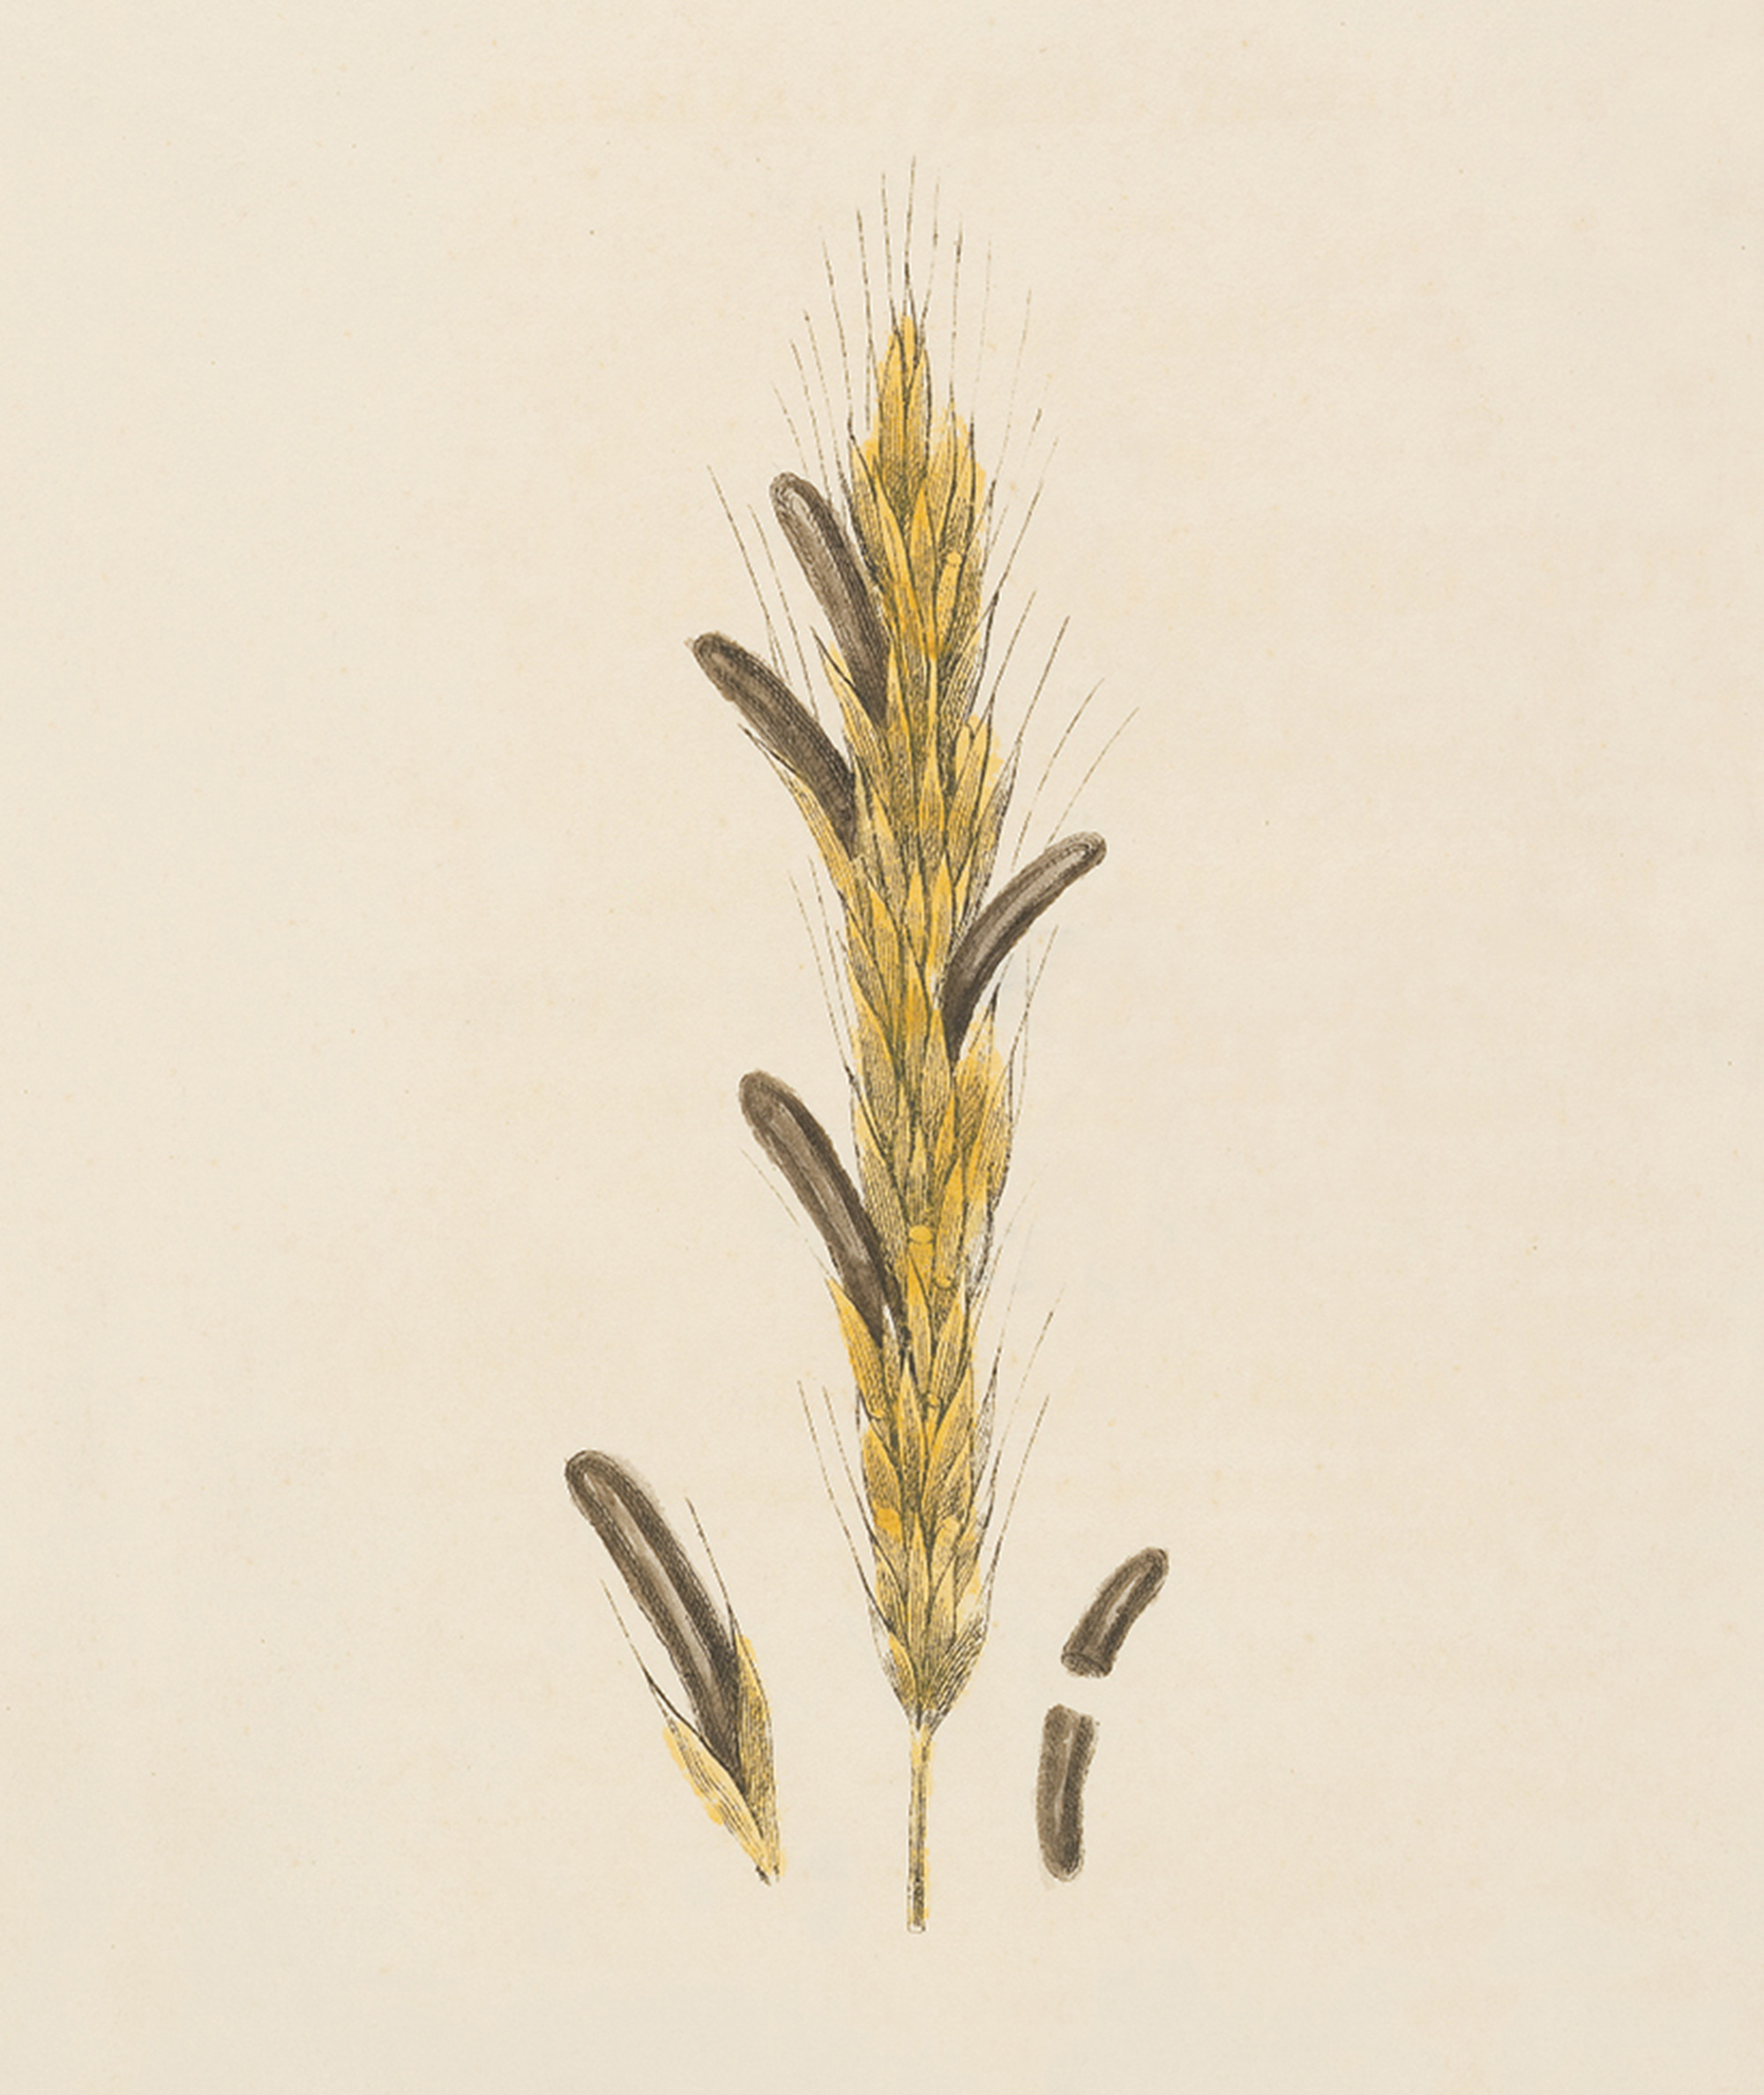 An illustration of an ear of rye infected with ergot fungus from Adam Neale’s eighteen twenty-eight work titled “Researches Respecting the Natural History, Chemical Analysis, and Medicinal Virtues, of the Spur, or Ergot of Rye, When Administered as a Remedy in Certain States of the Uterus.”